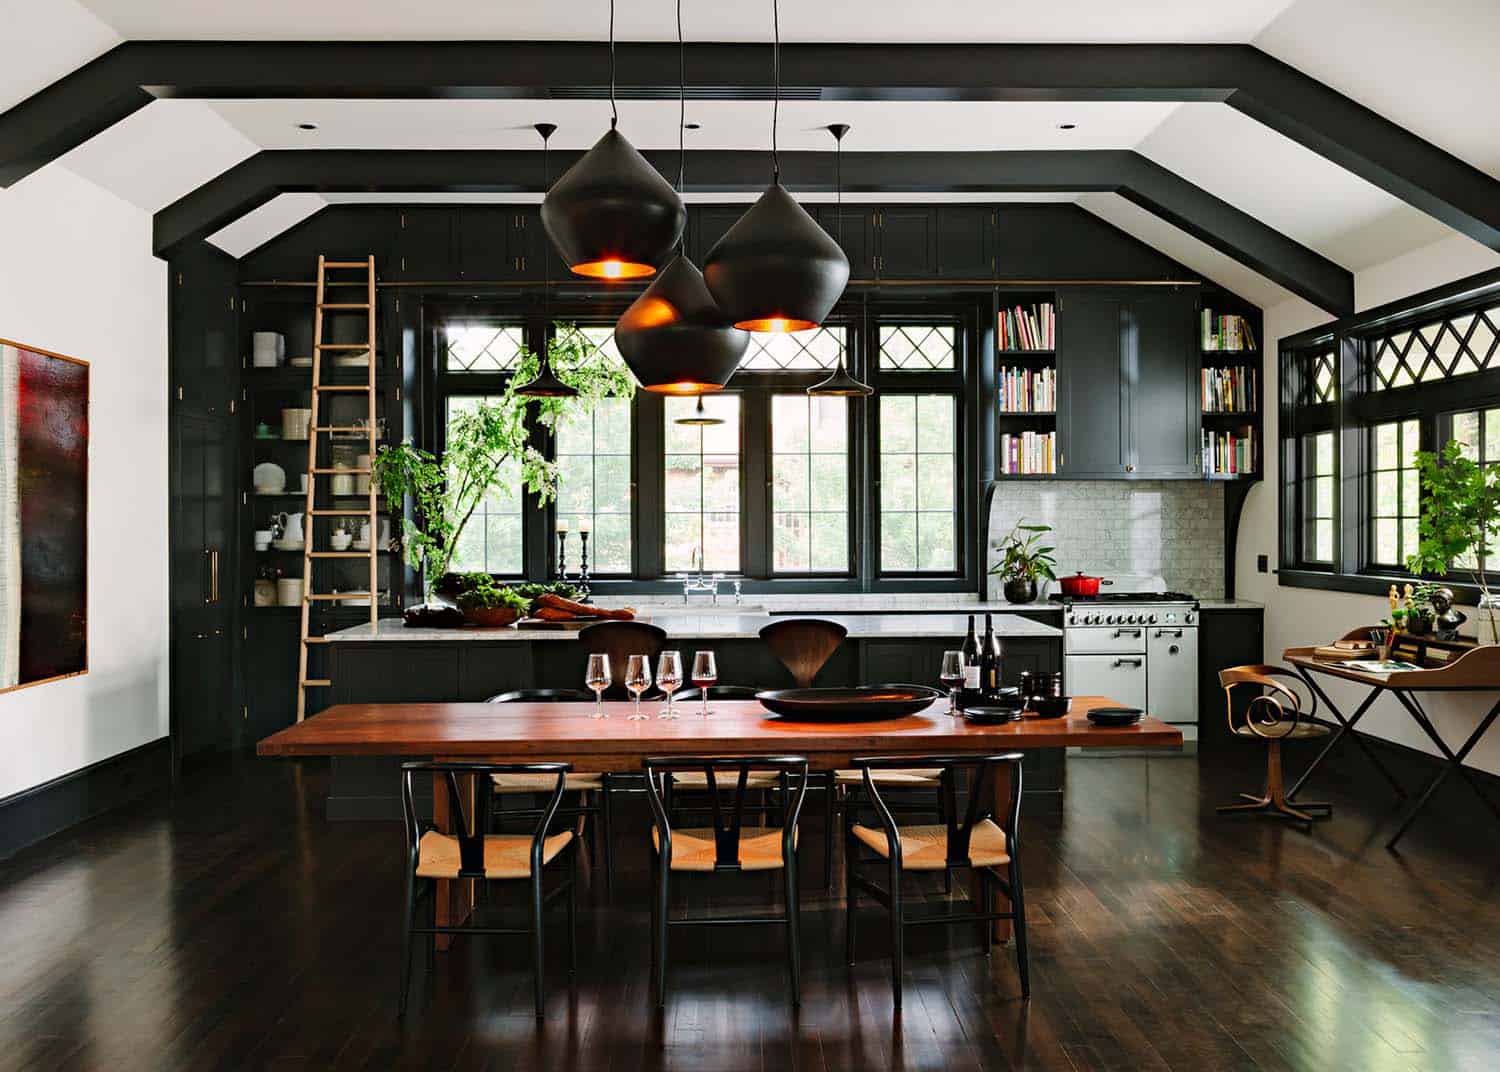 Public library transformed into fresh and inviting home in Portland